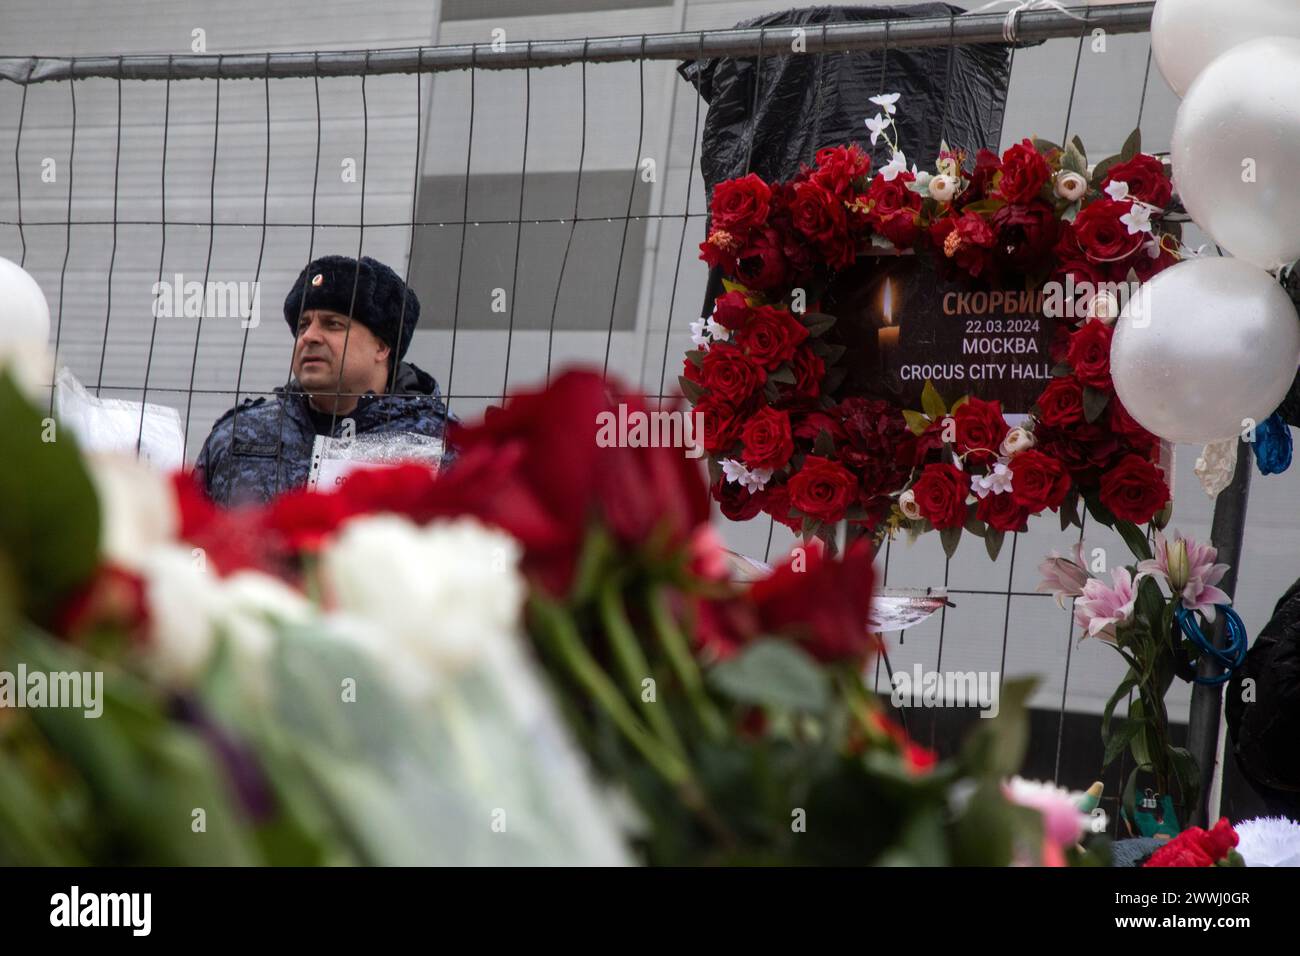 Moscow region, Russia. 24th of March, 2024. People lay flowers at a makeshift memorial in front of the Crocus City Hall in Krasnogorsk city, Moscow region, Russia. Credit: Nikolay Vinokurov/Alamy Live News Stock Photo